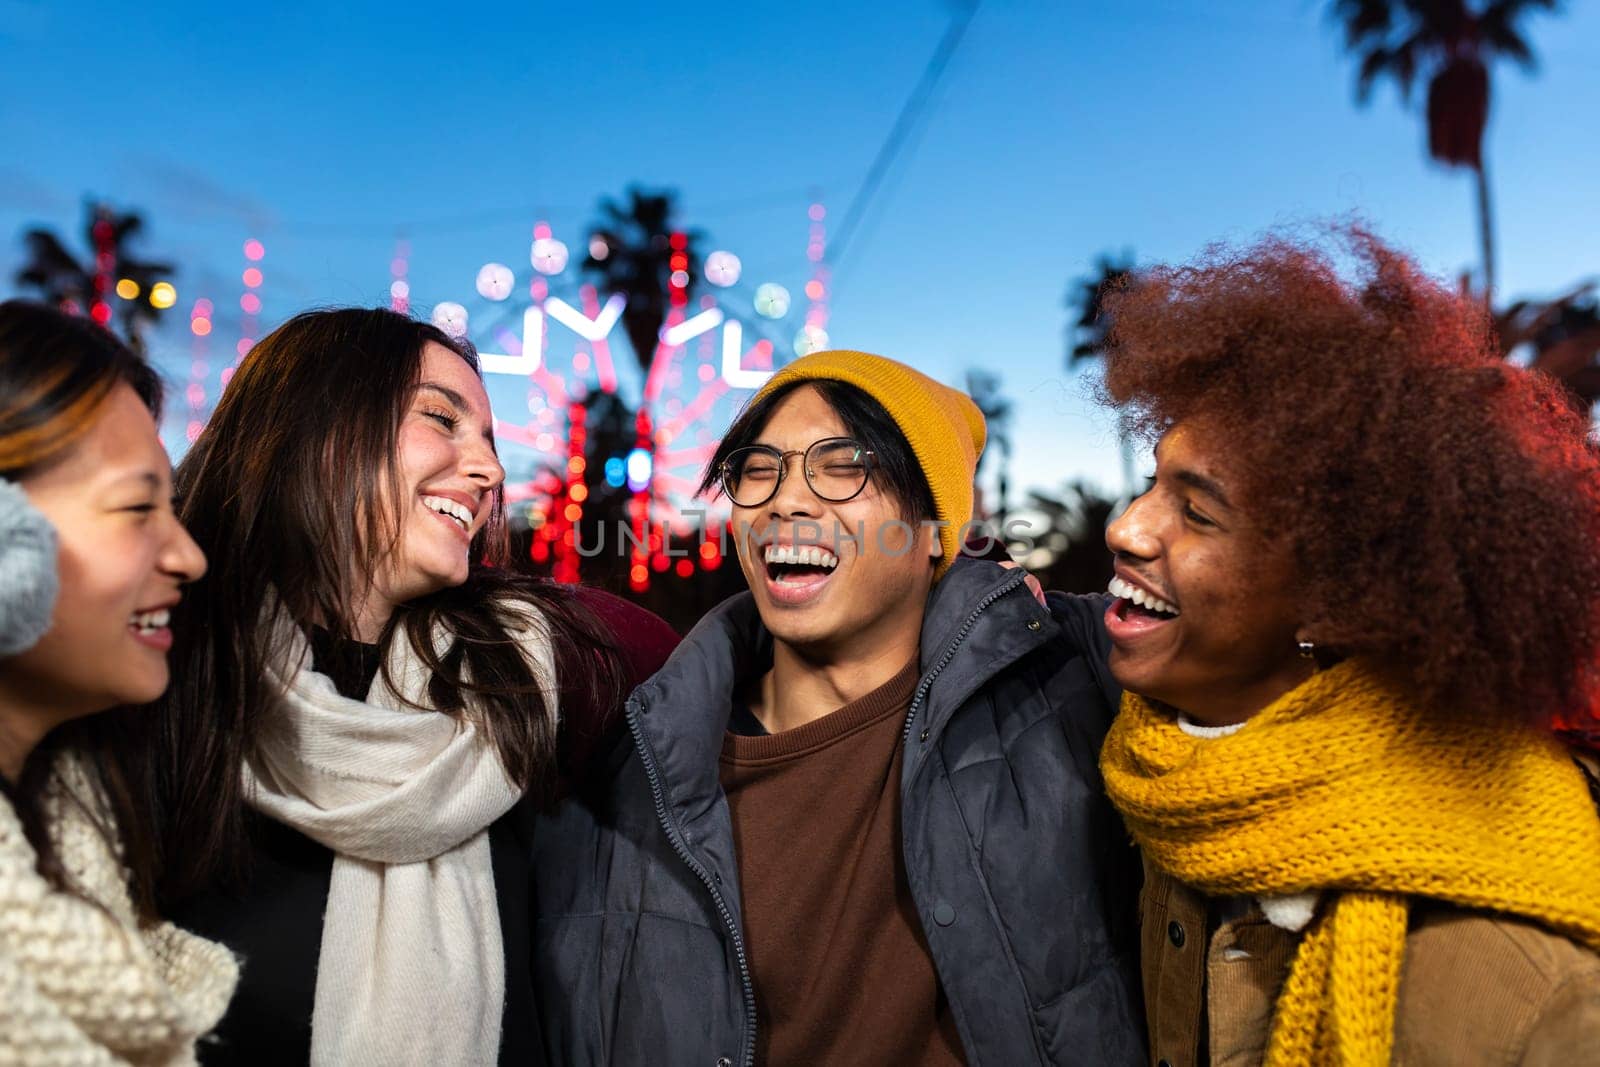 Multiethnic university friends laughing and having fun together during winter Christmas market outdoors. by Hoverstock